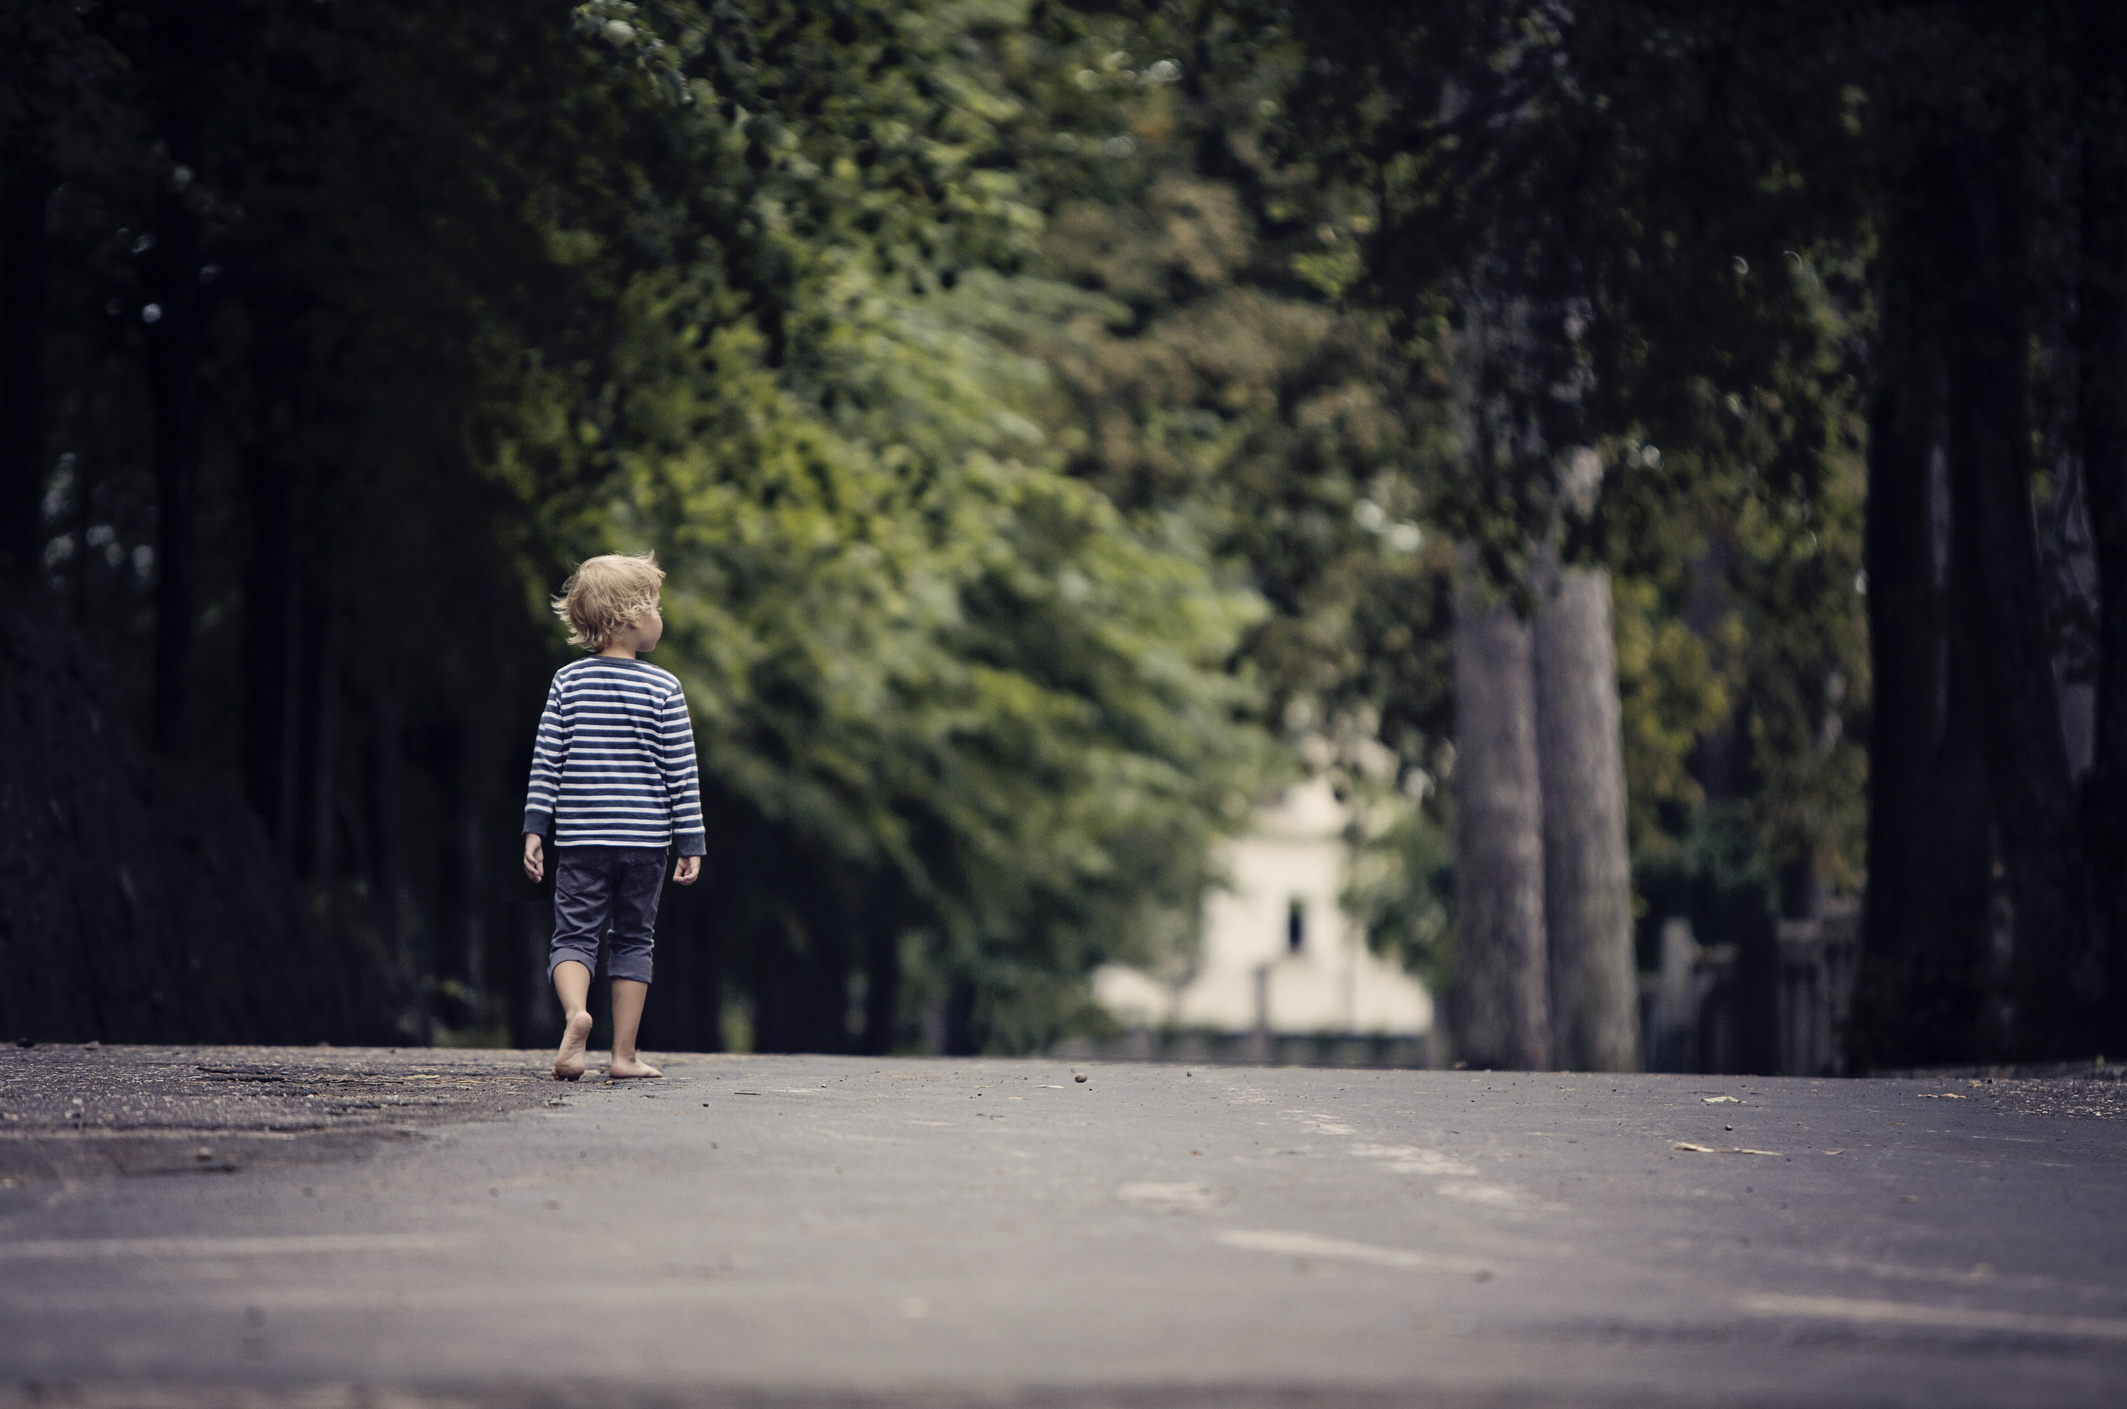 A young boy is walking barefoot in the street